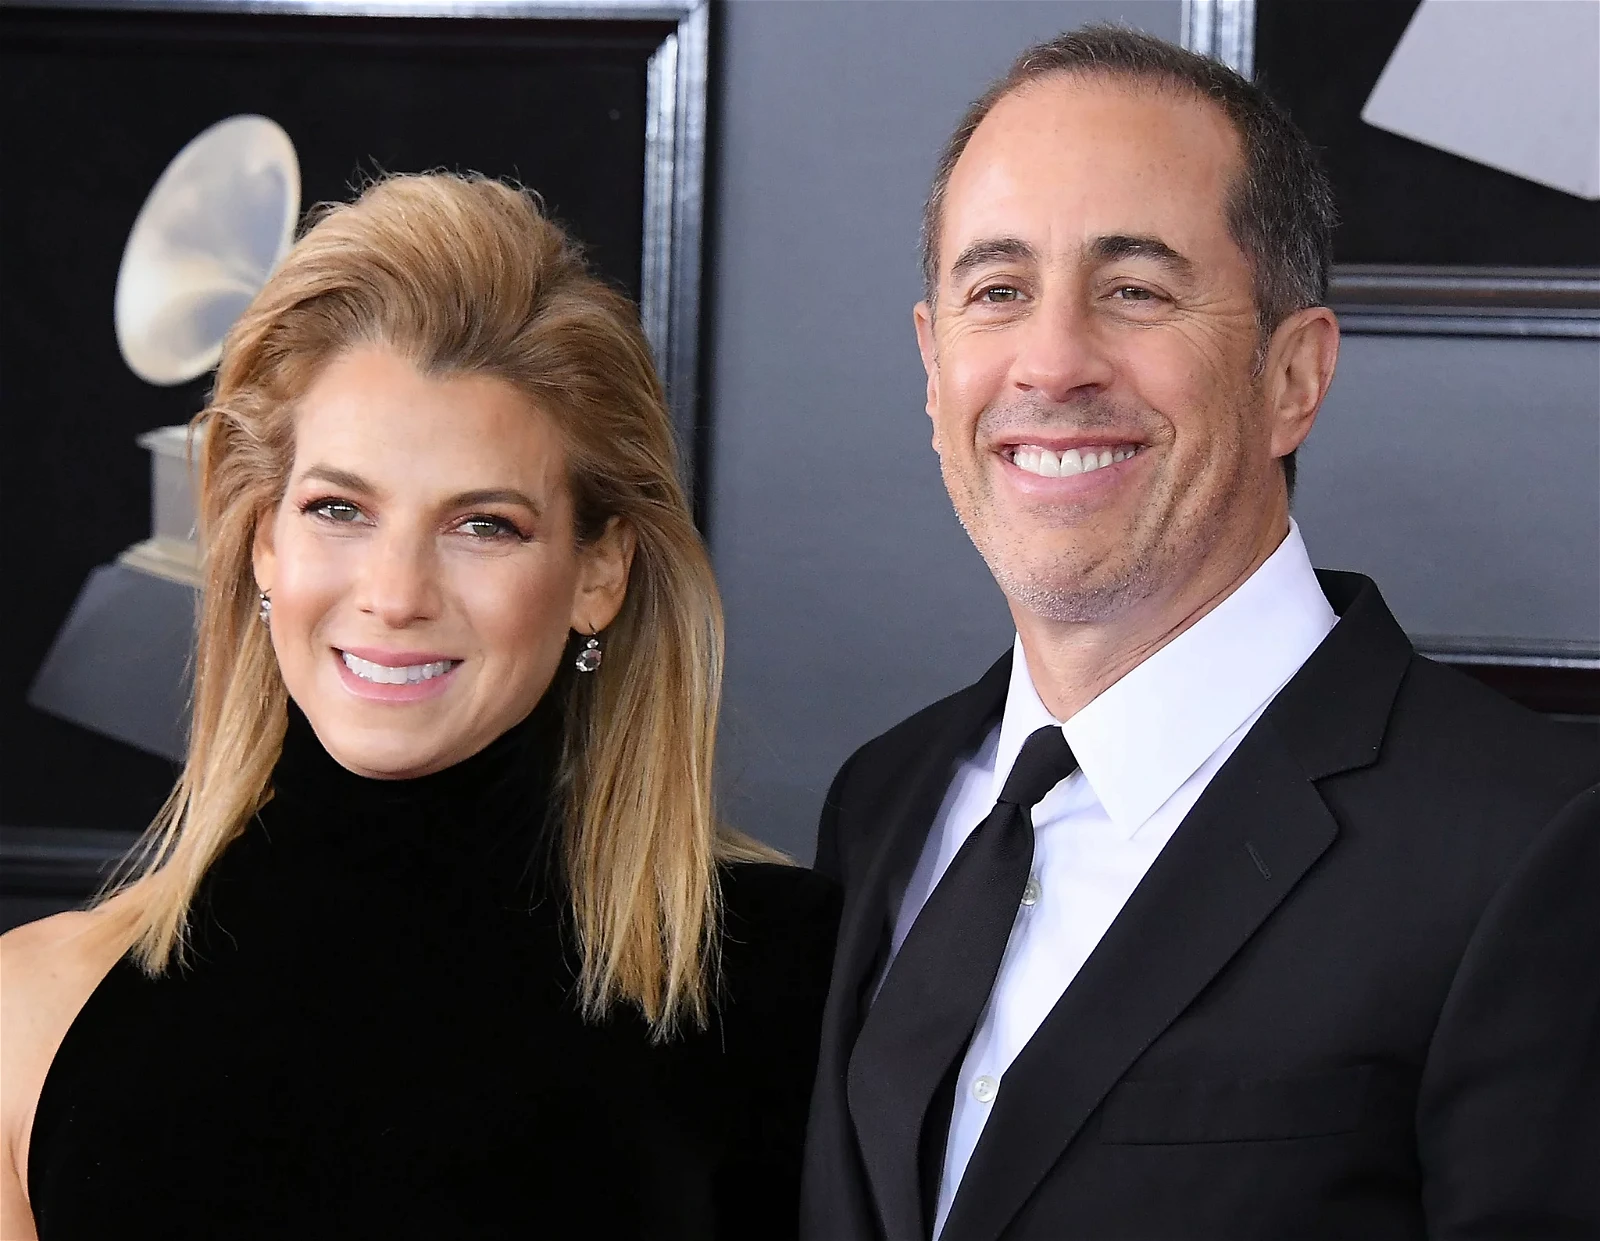 Jerry Seinfeld with wife Jessica Seinfeld.